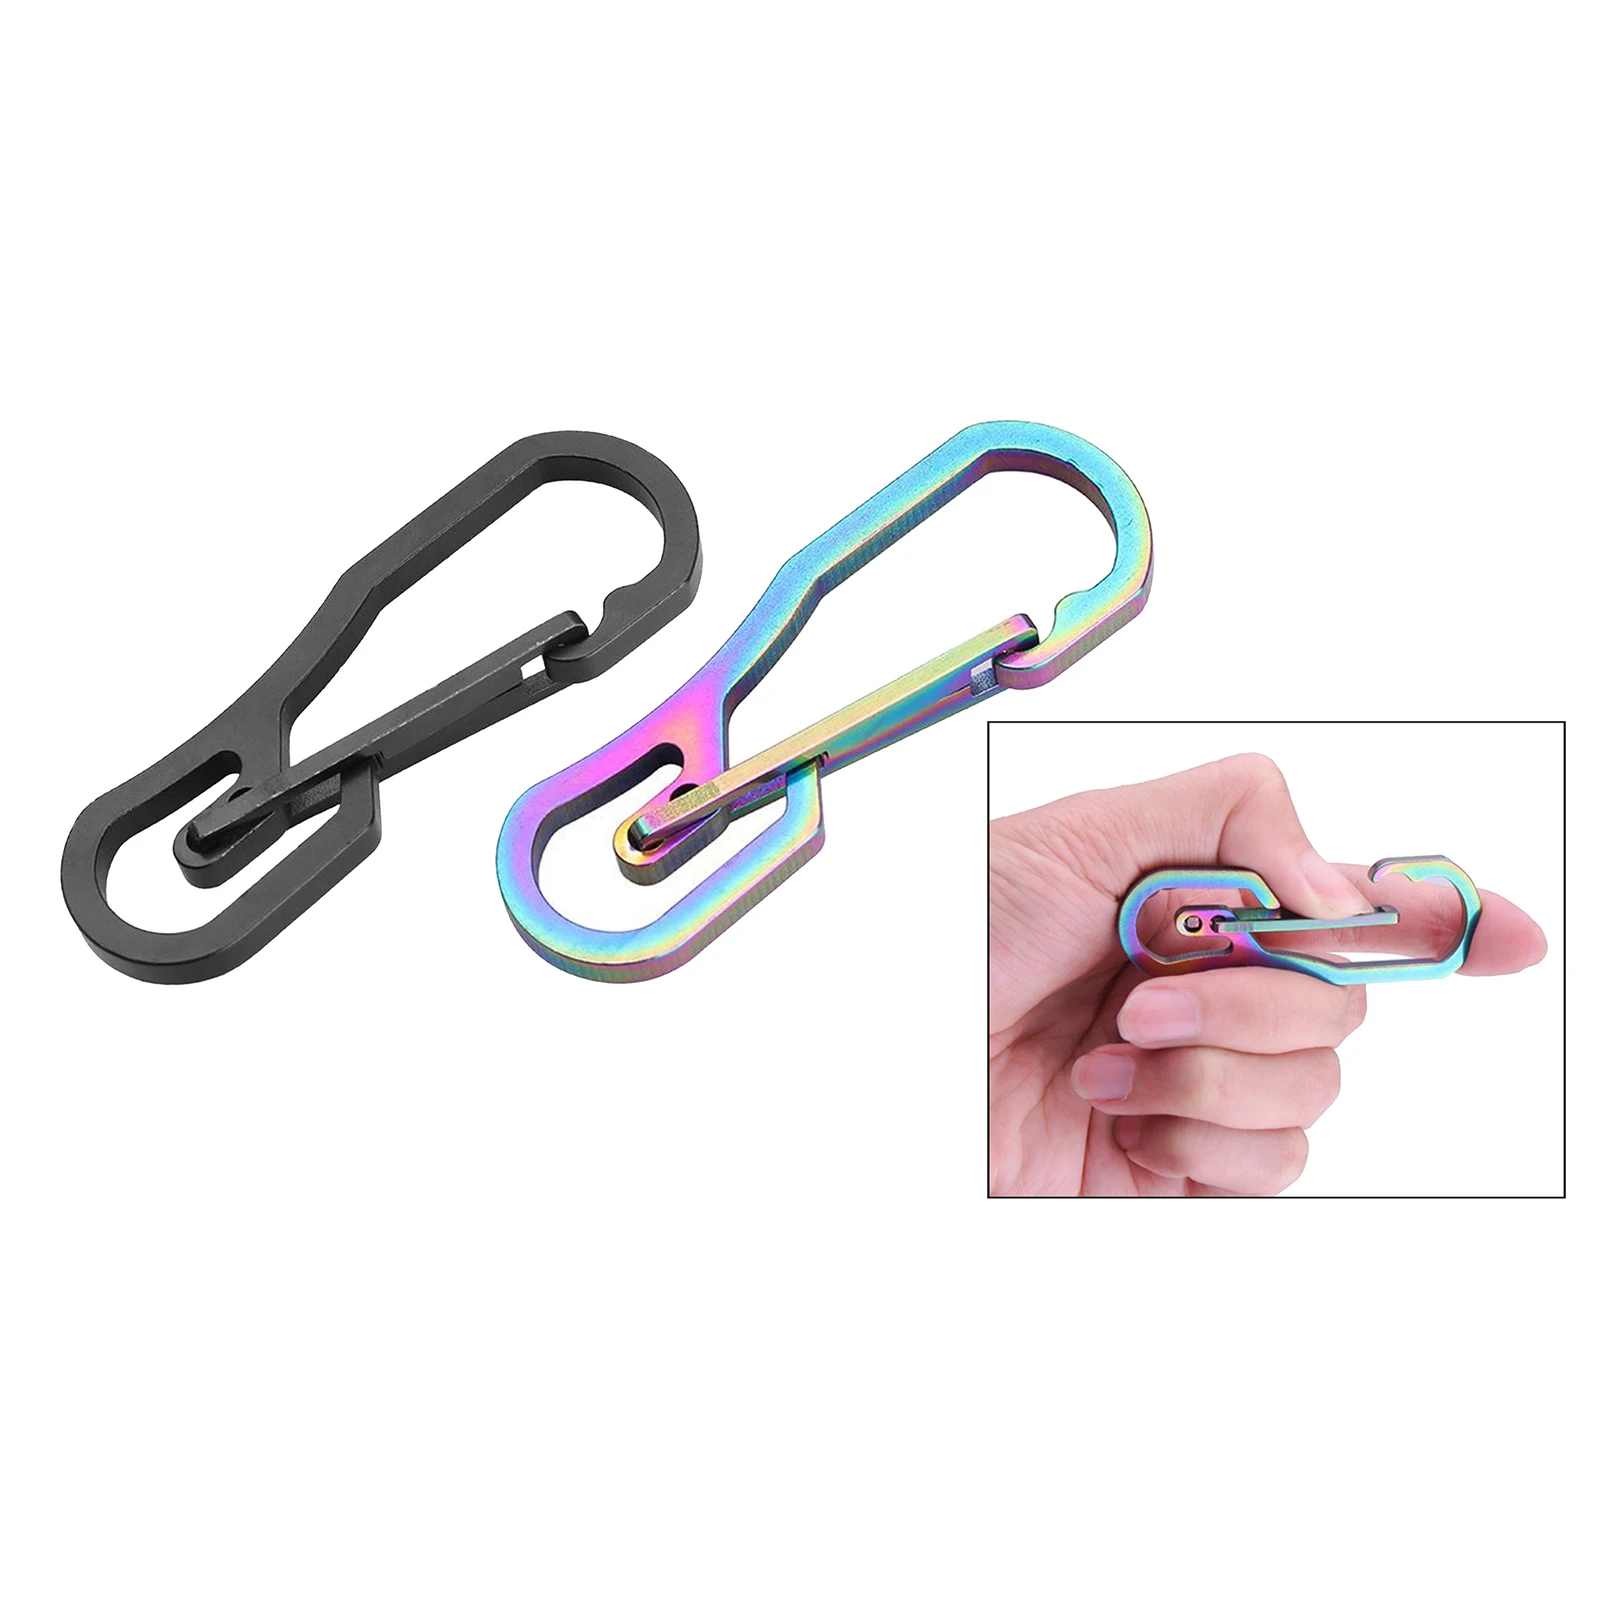 Stainless Steel Carabiner Clip, Durable Spring Snap Hook Key Chain Buckle Clips for Camping Hiking Fishing Traveling